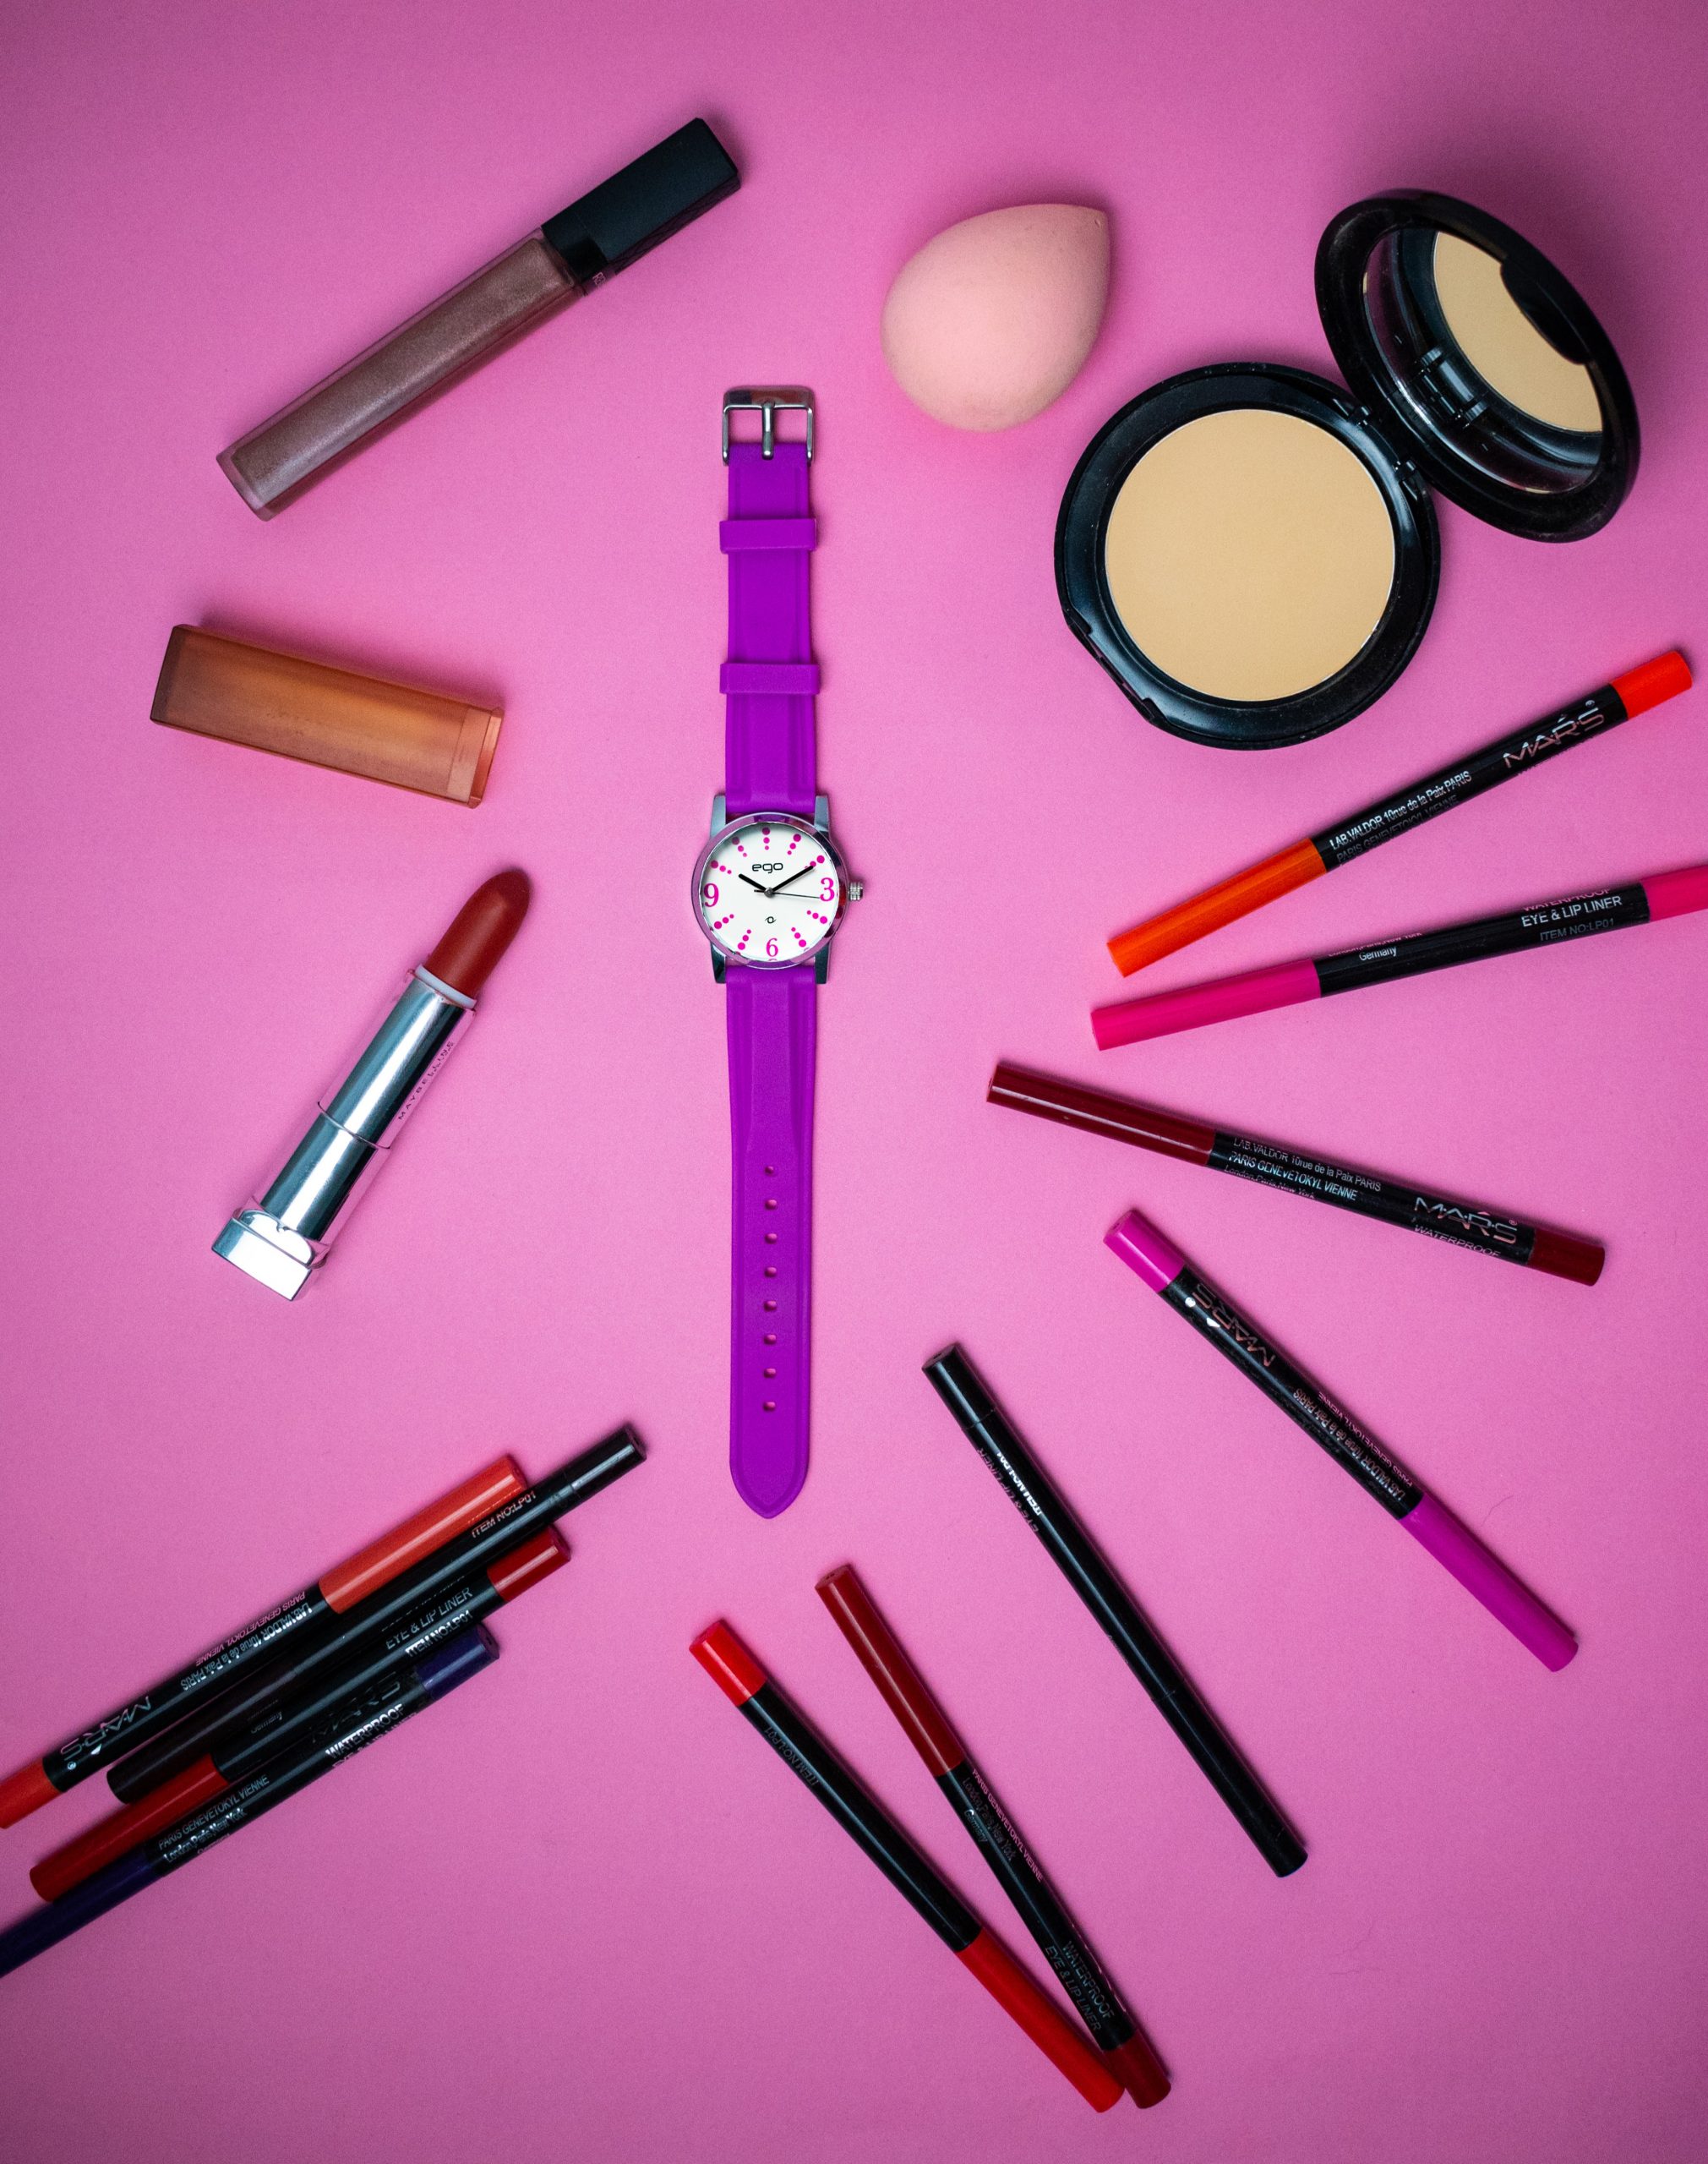 A wrist watch and cosmetic items